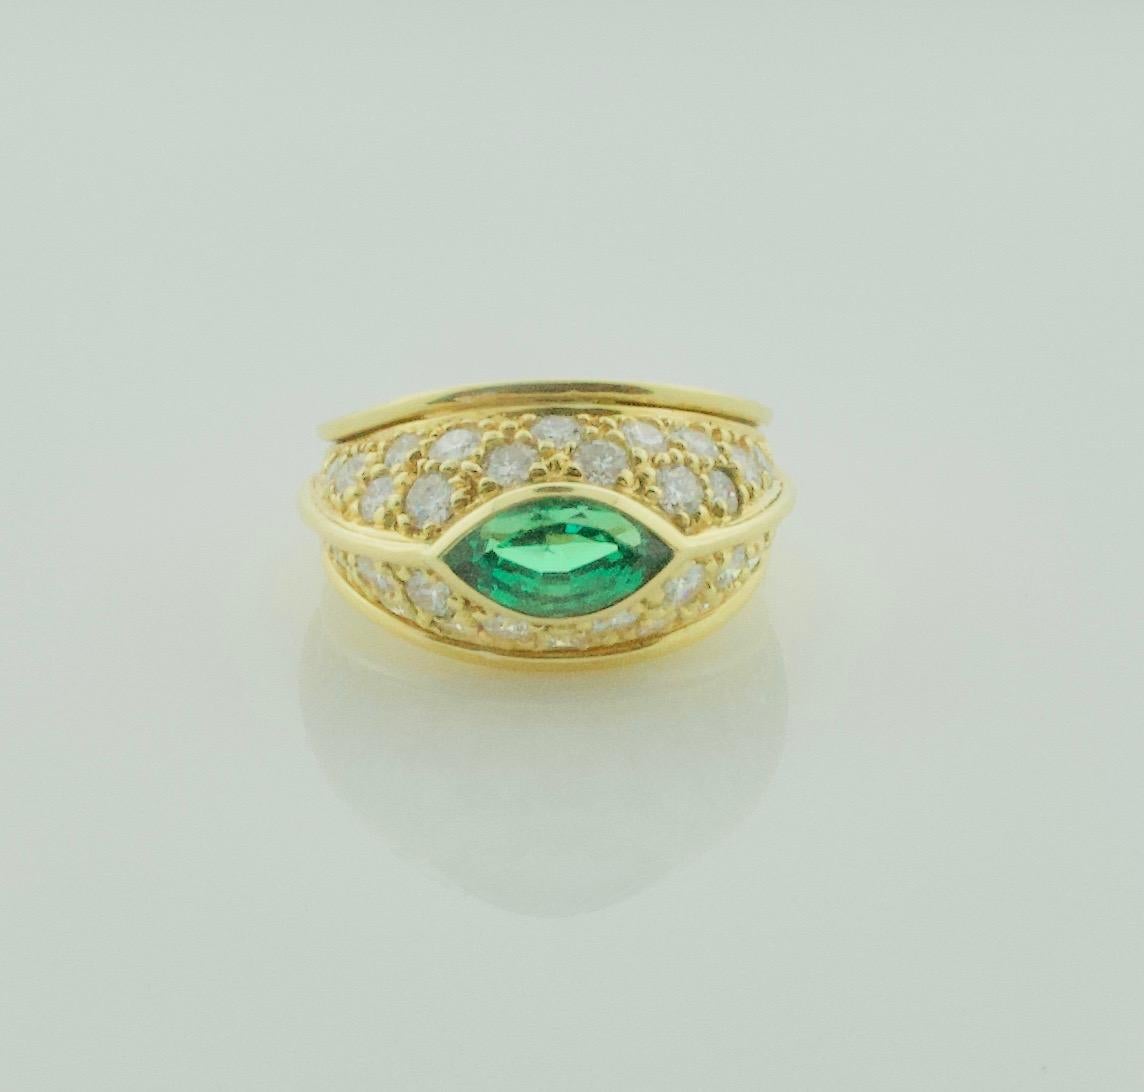 Very Fine Marquise Emerald and Diamond Ring in 18k In New Condition For Sale In Wailea, HI